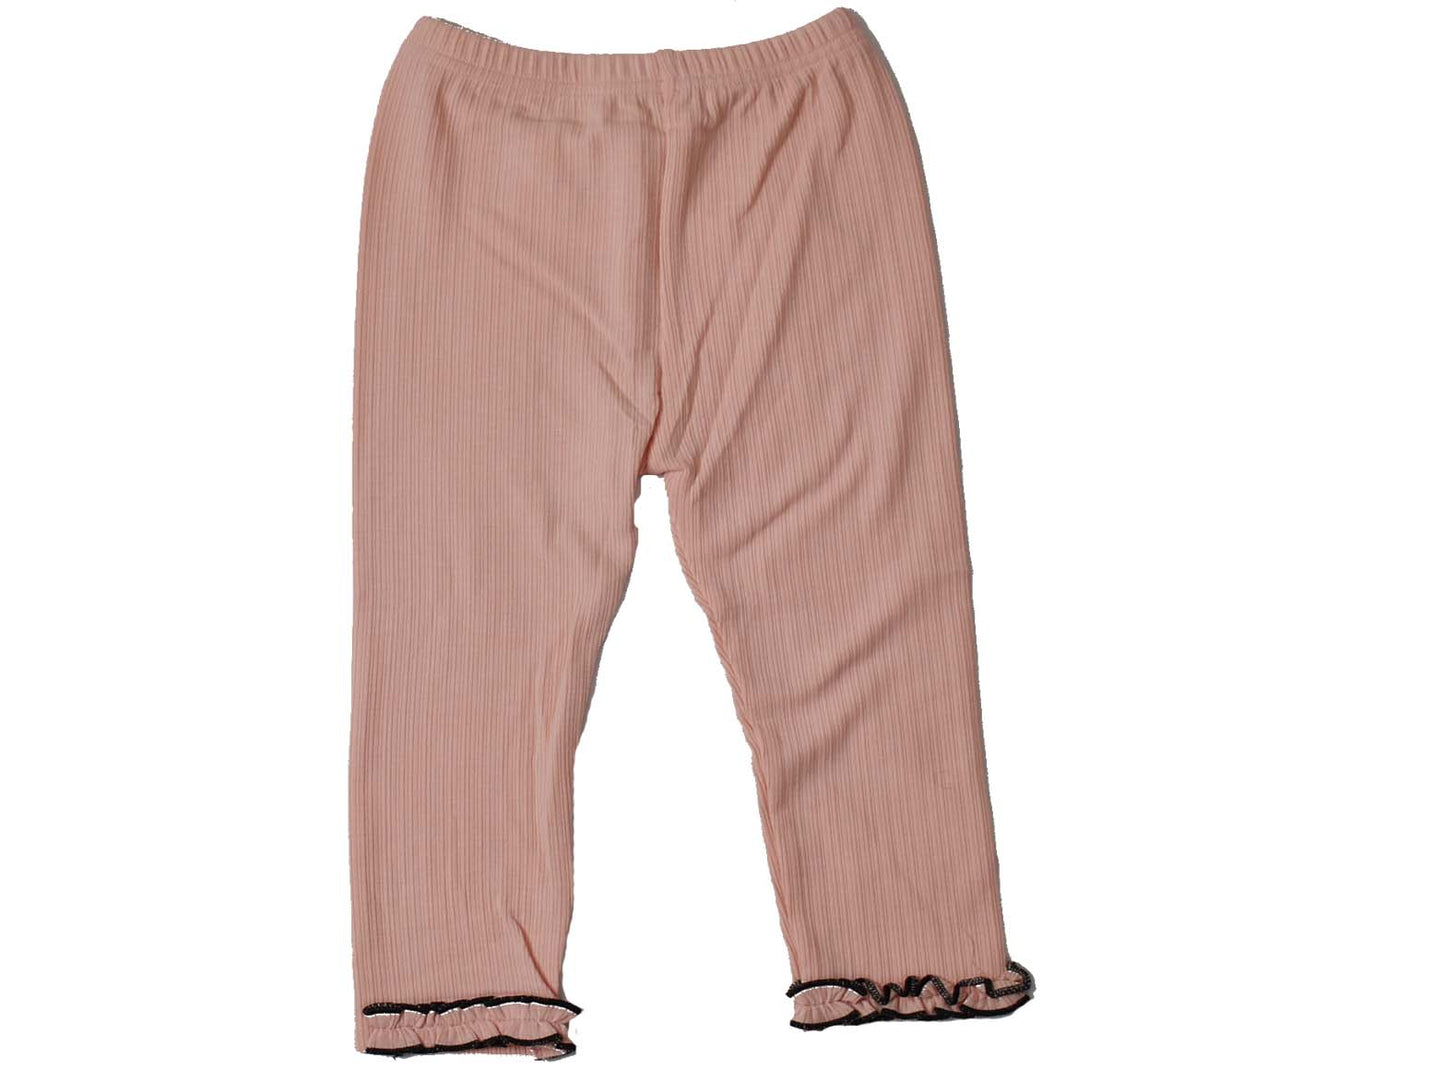 Trousers Peach with Black Border